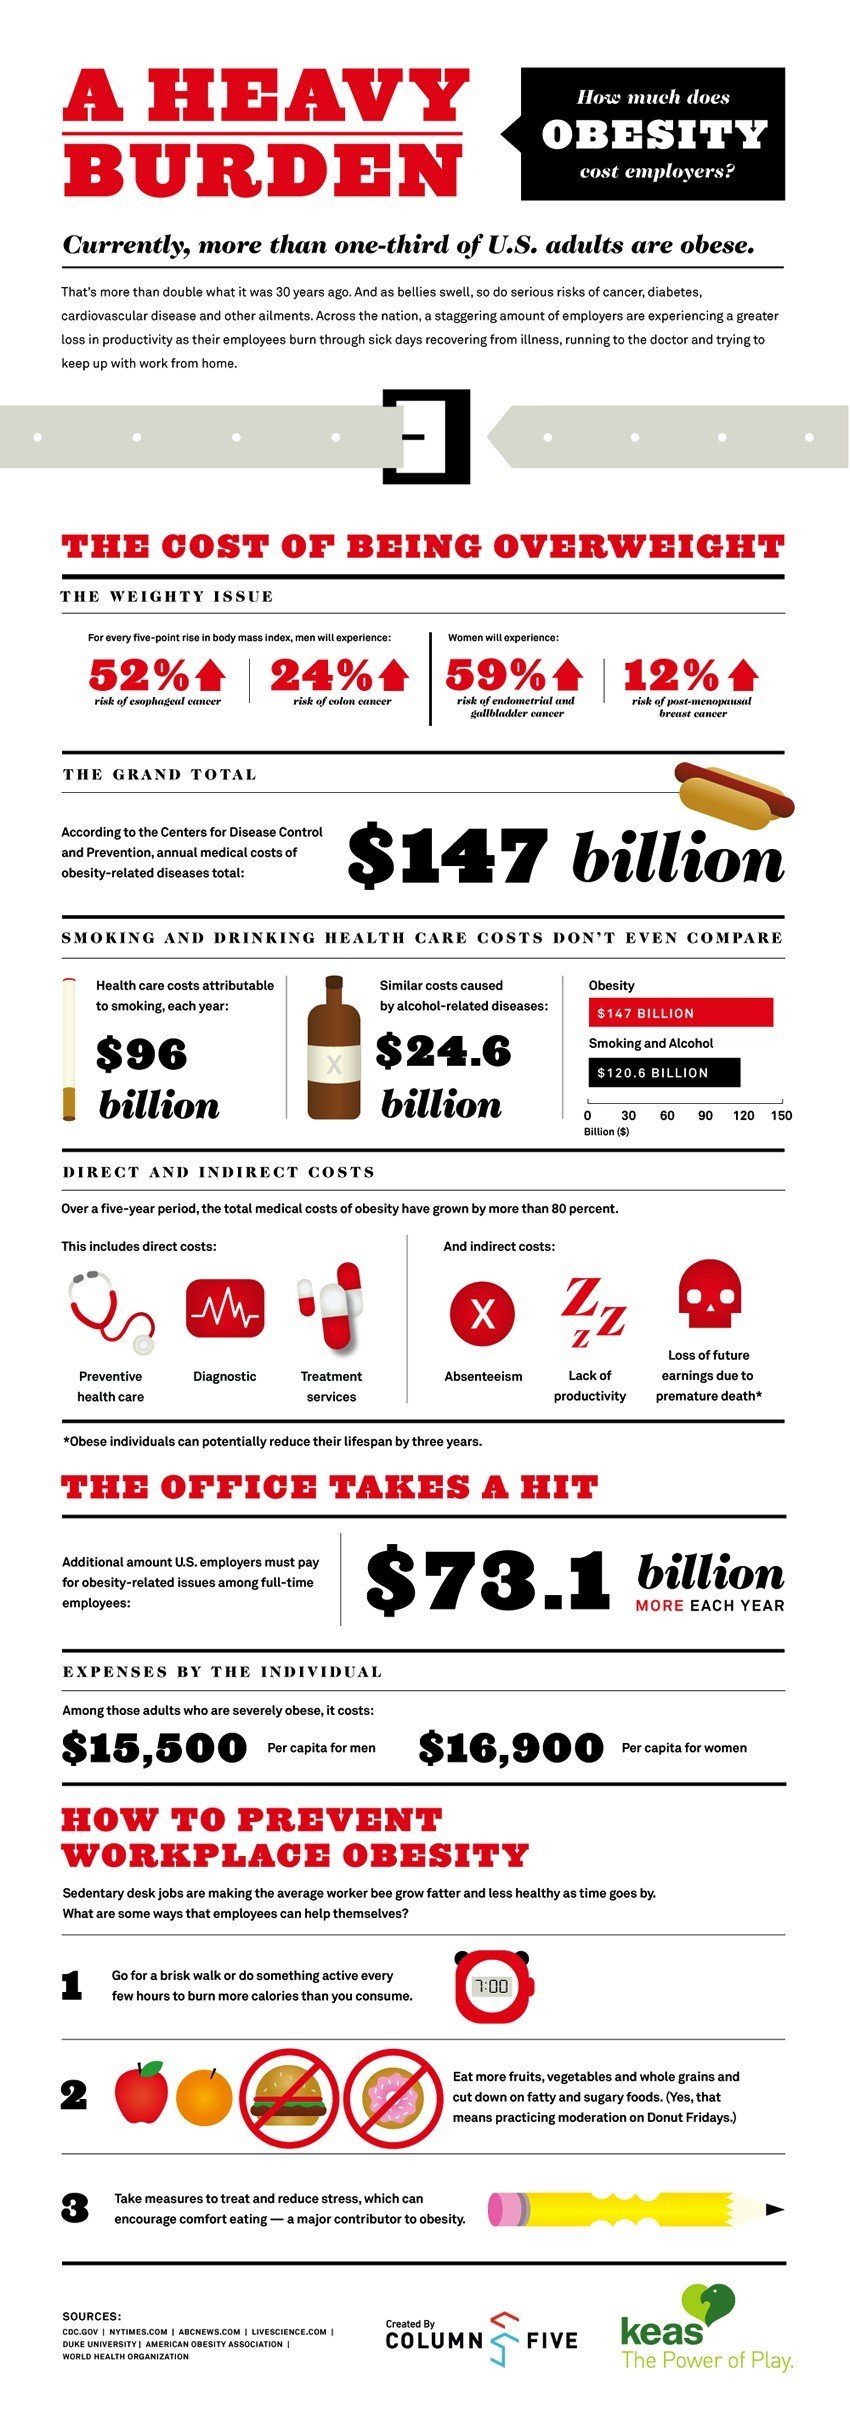 Obesity Infographic: The Cost of Being Overweight - ComplianceandSafety.com